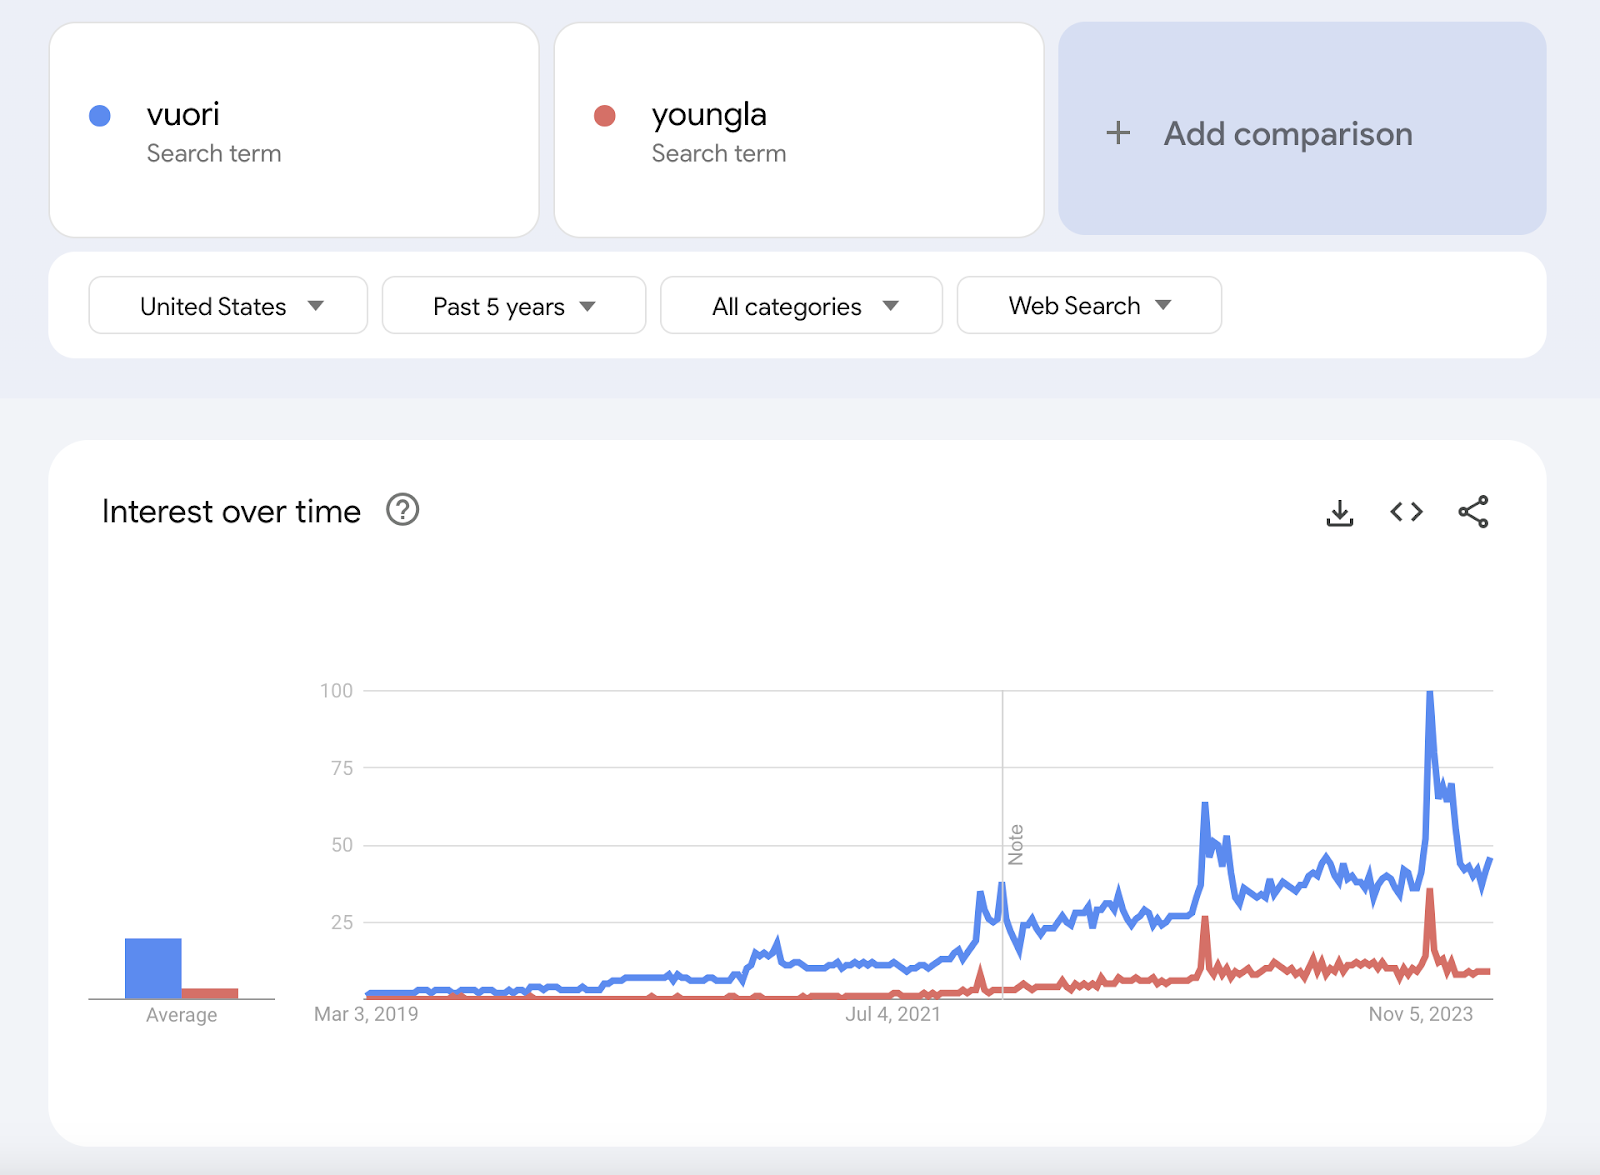 Google Trends "interest implicit    time" graphs showing a examination  betwixt  "Vuori" and "YoungLA" queries